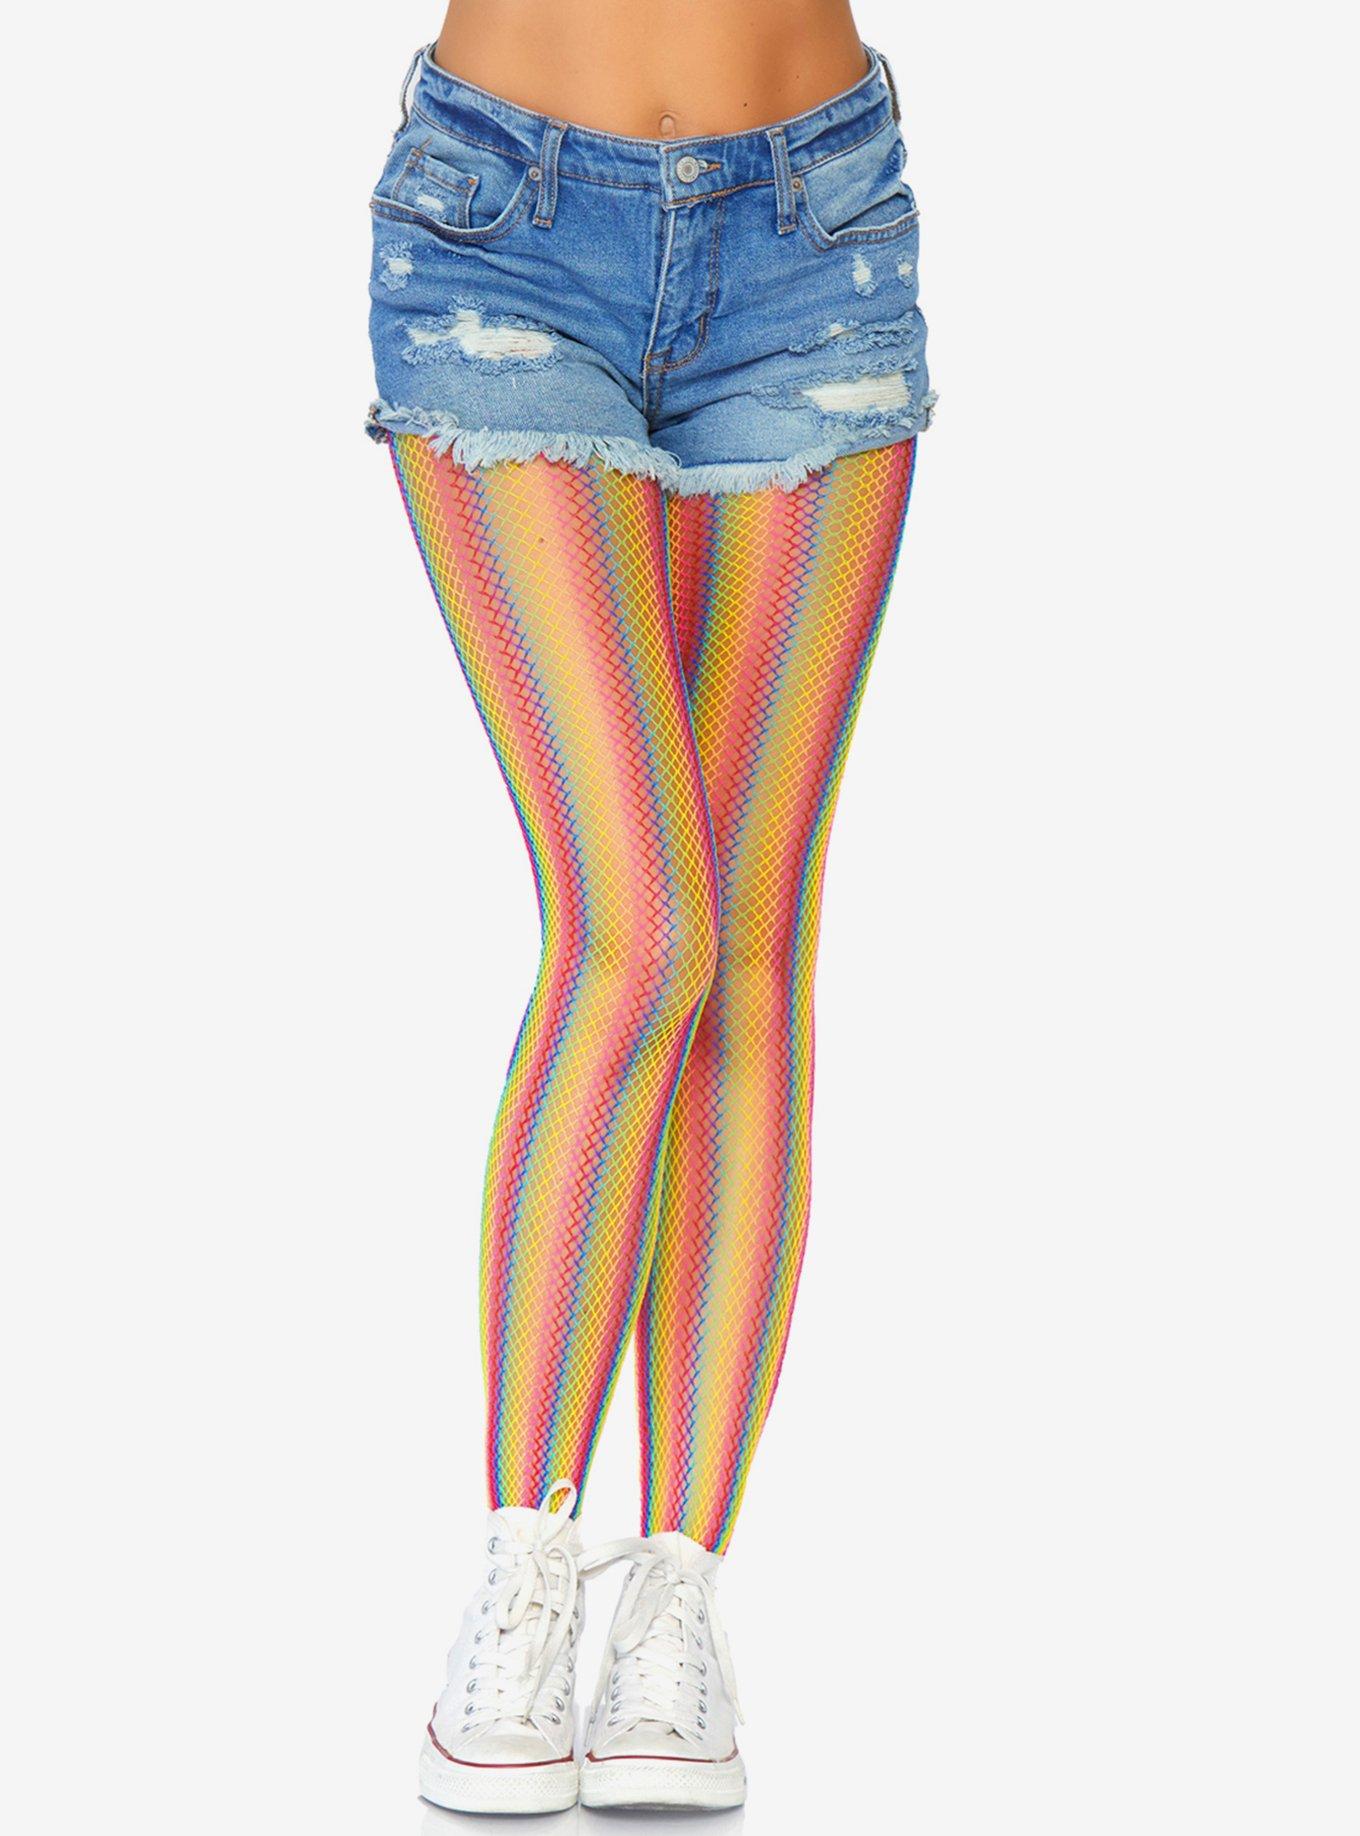 HOT TOPIC COLORFUL RAINBOW FISHNET TIGHTS HARD TO FIND ONE SIZE NEW IN BAG